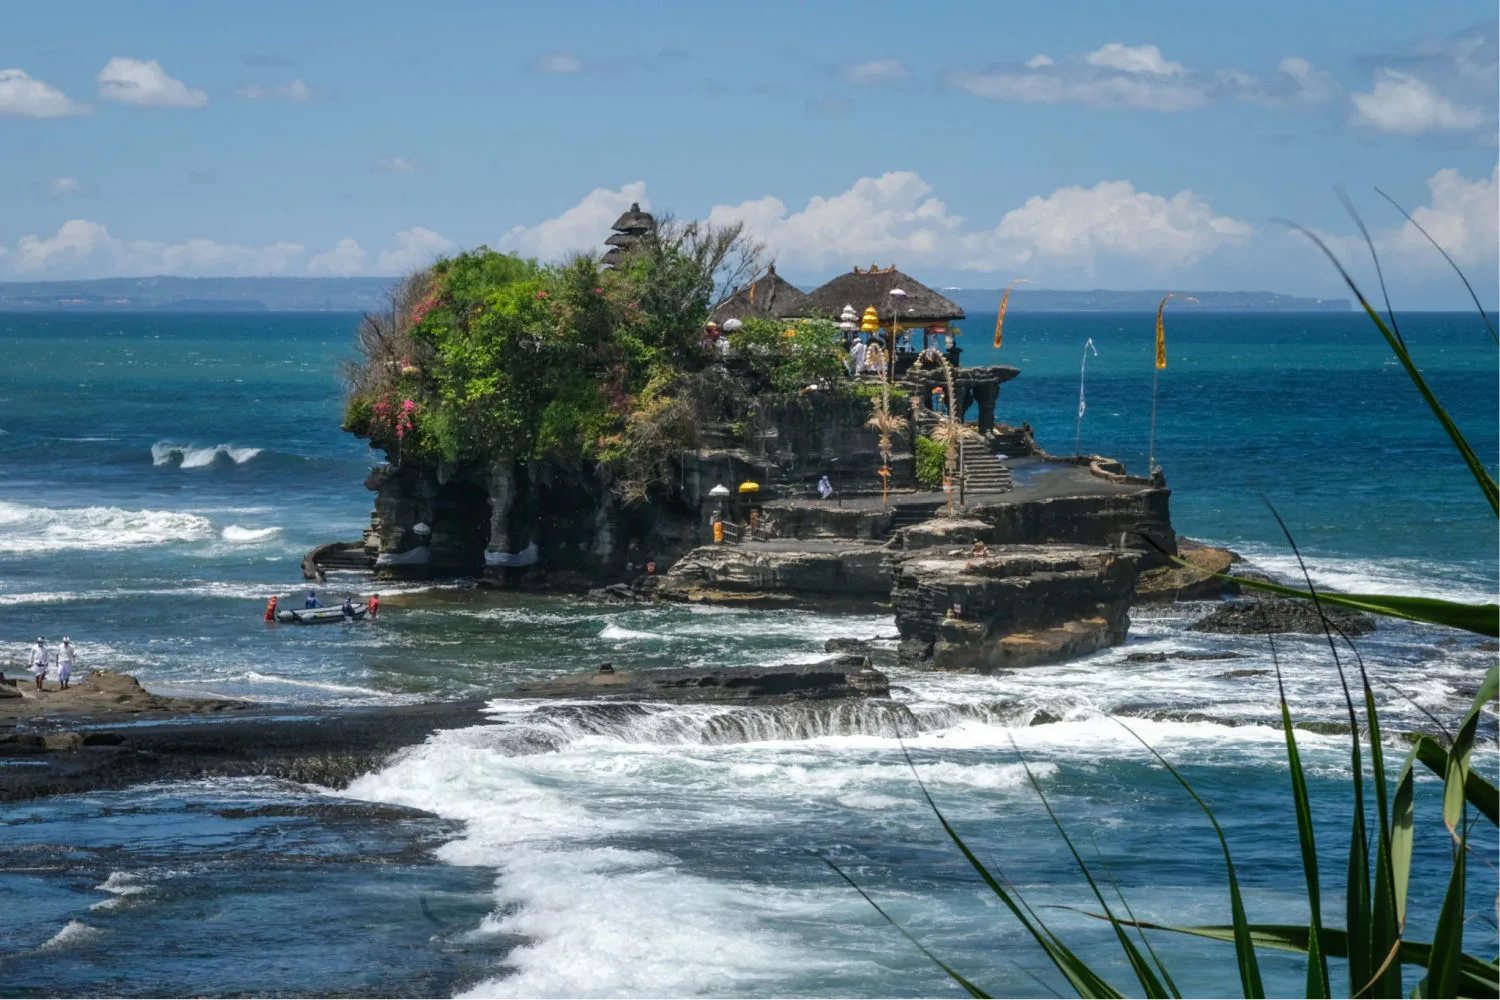 Two Men Have Gone Missing At Sea Near Tanah Lot In Bali